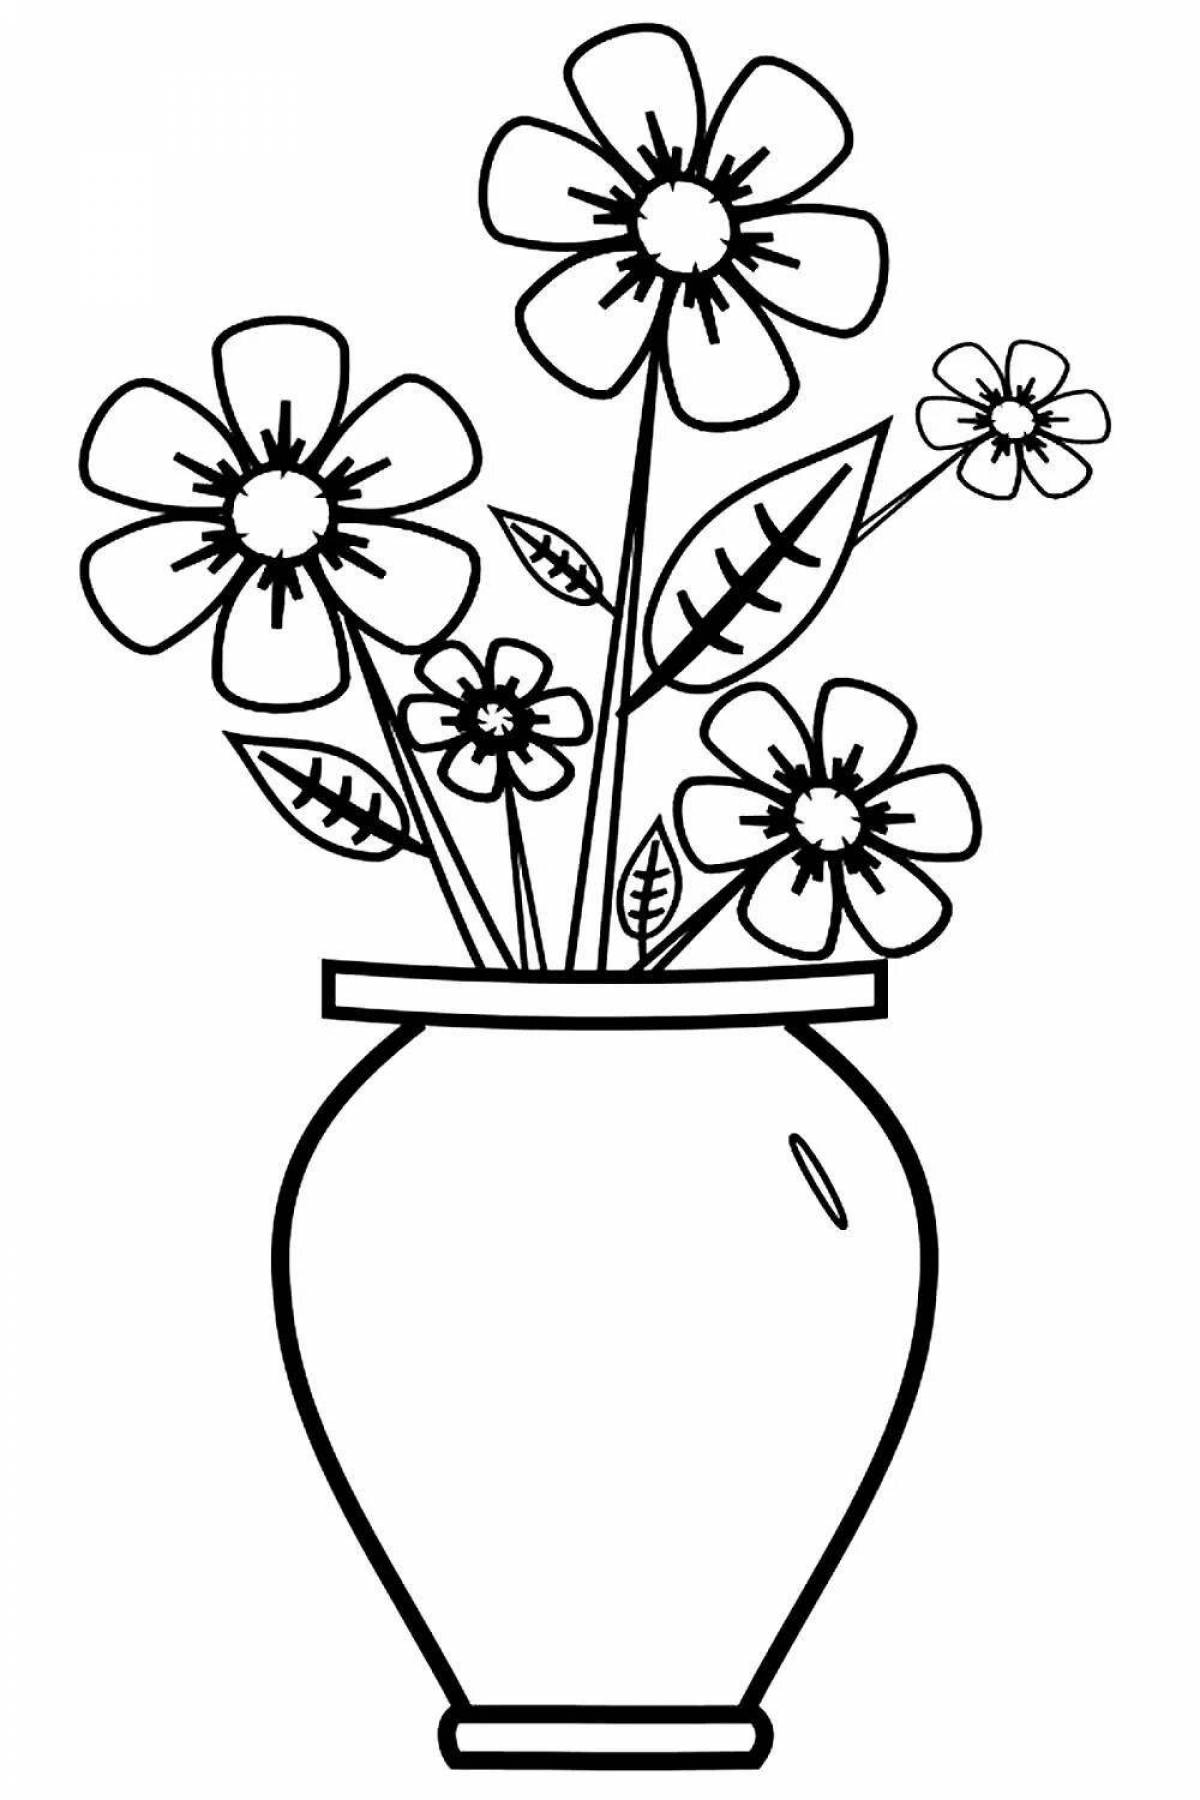 Coloring flowers in a vase for children